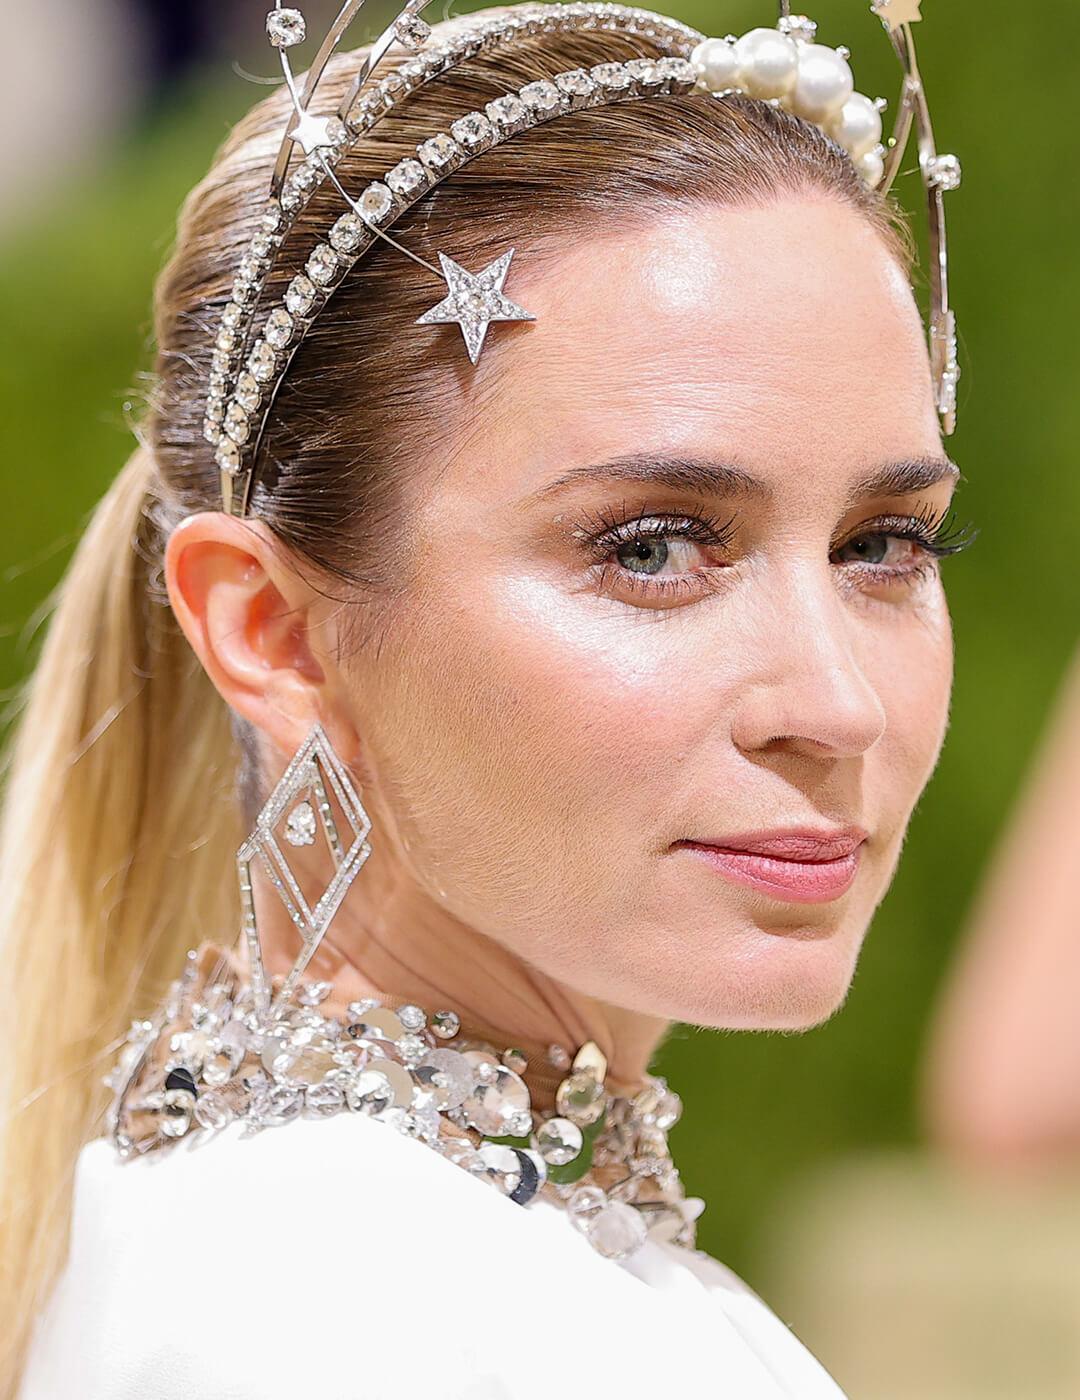 Emily Blunt rocking a glowy makeup look and silver and pearls jewelry at the red carpet